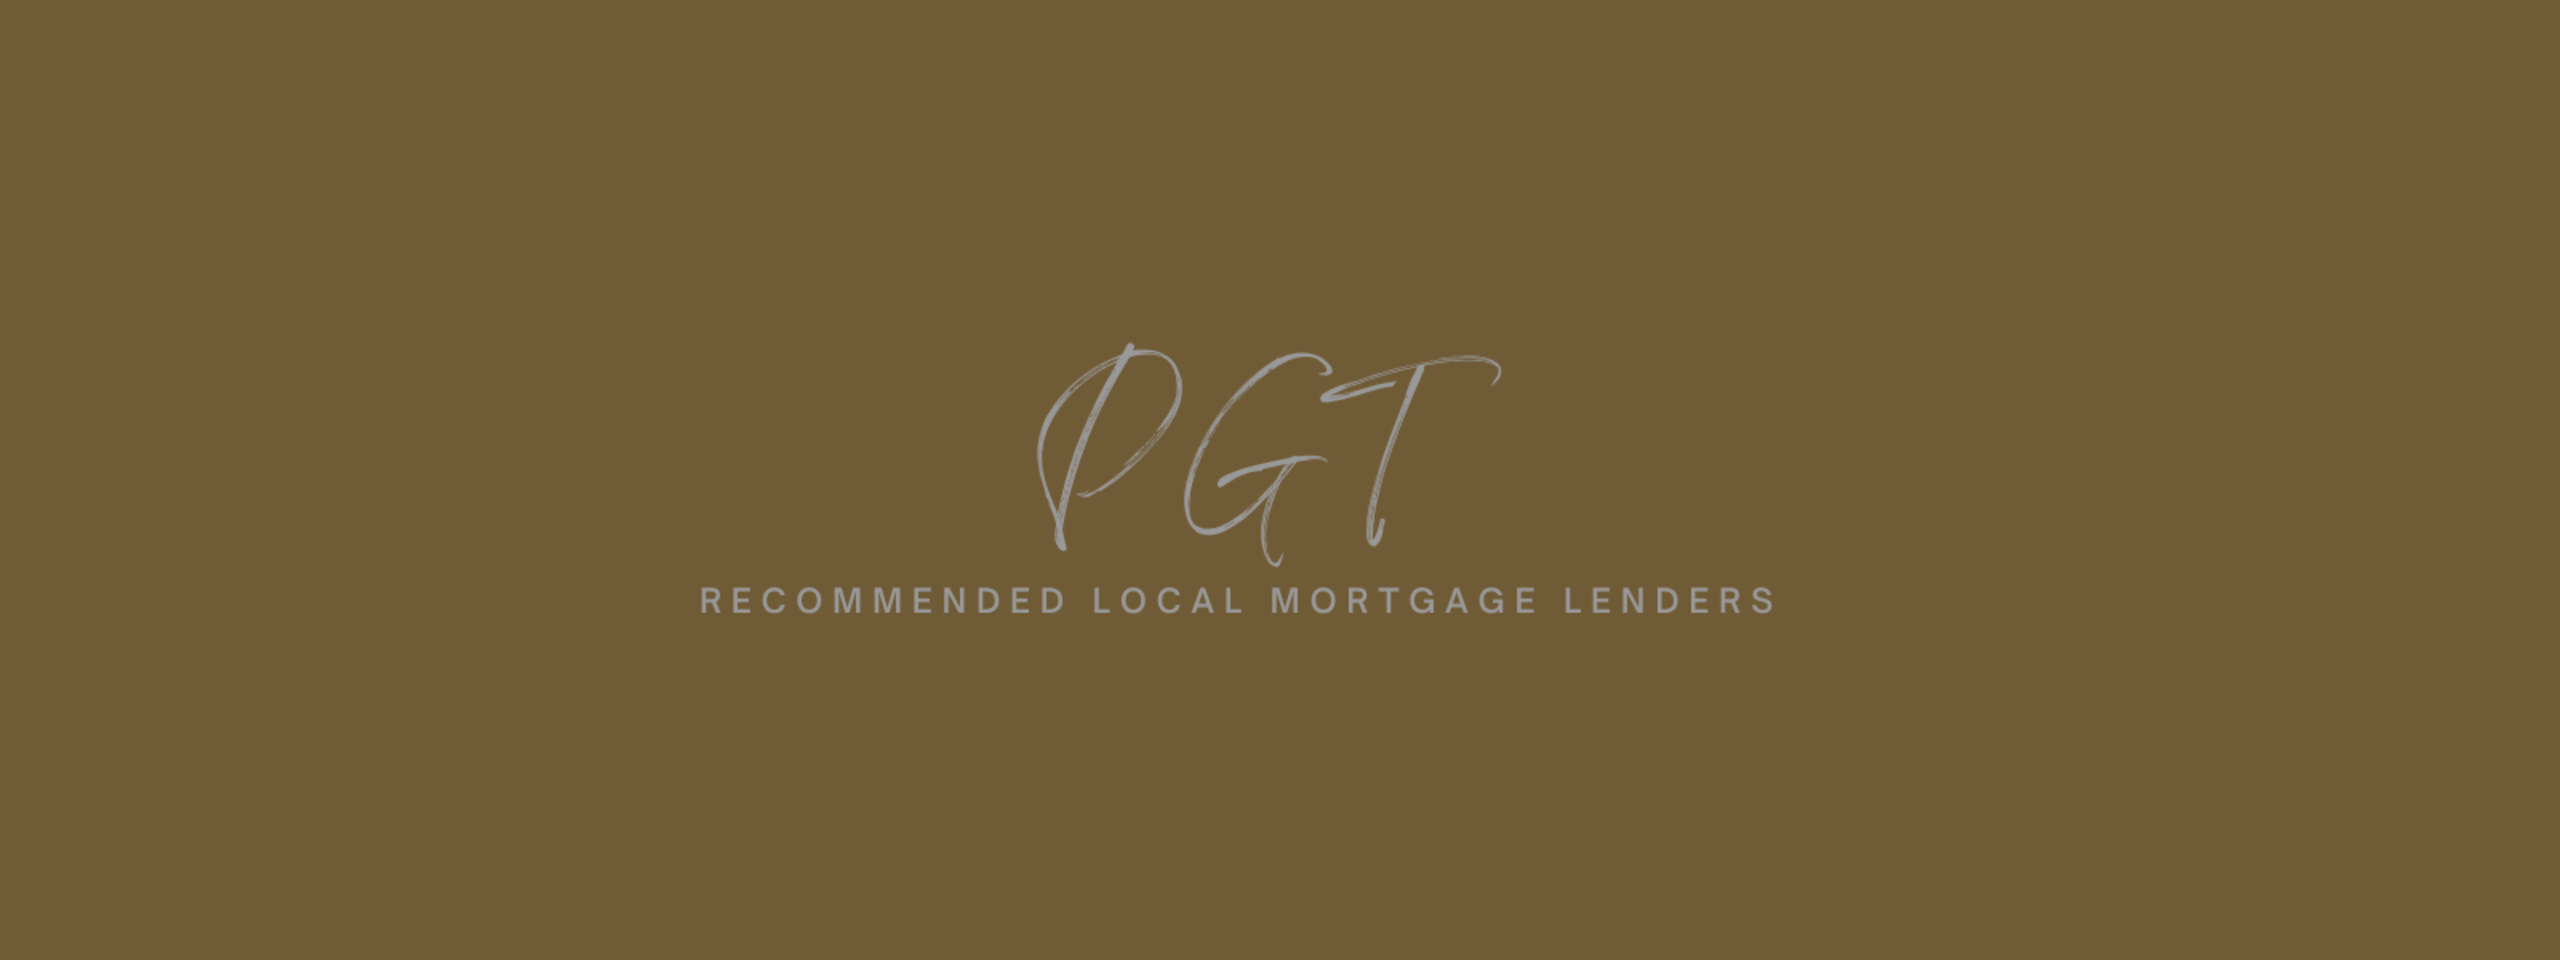 Recommended local lenders